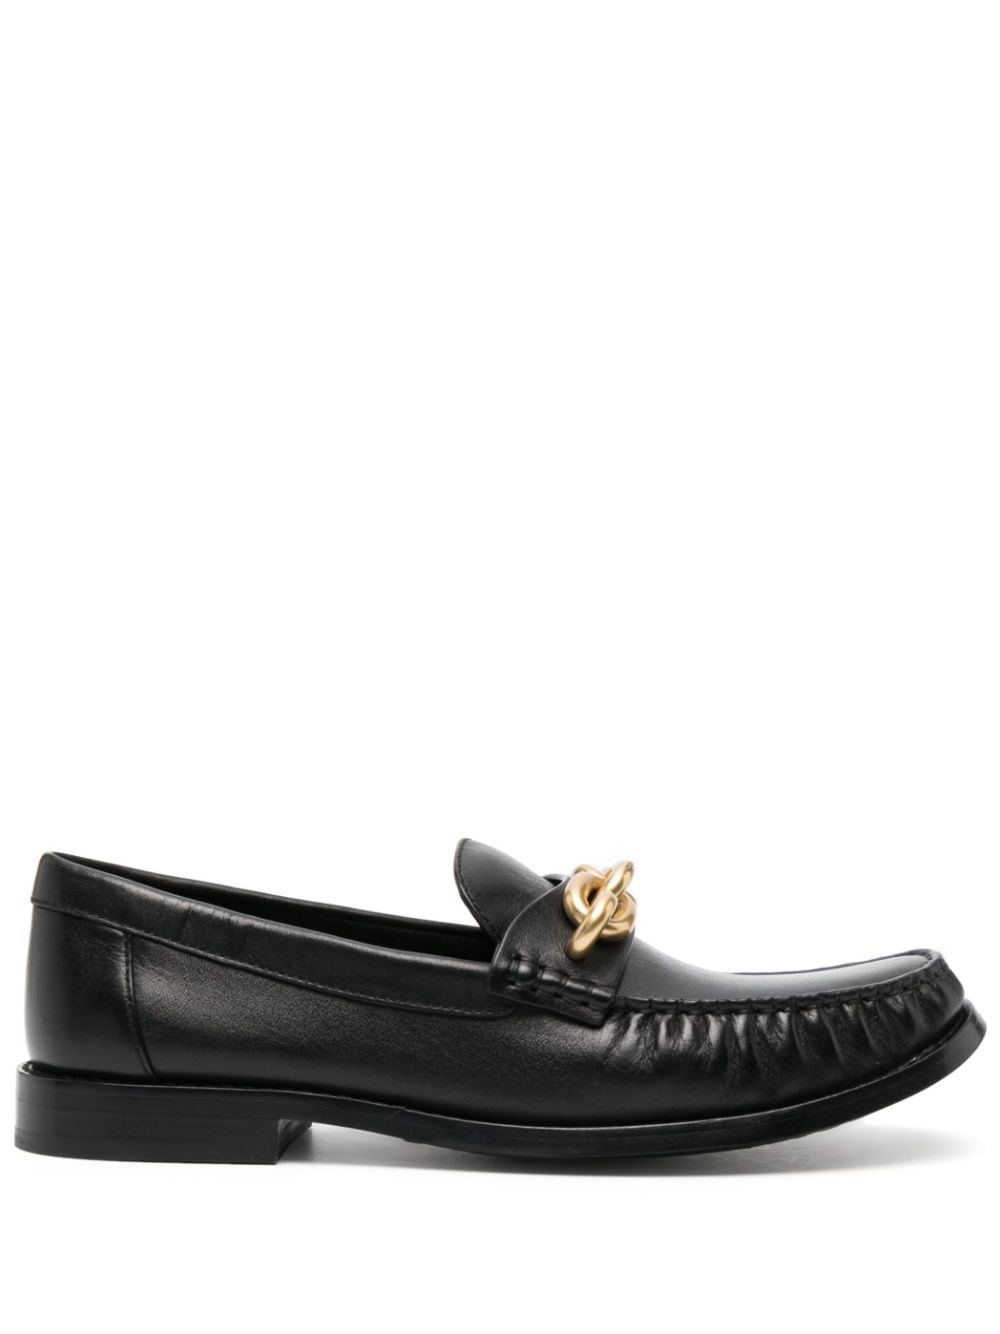 Coach chain-link detailing leather loafers - Black von Coach